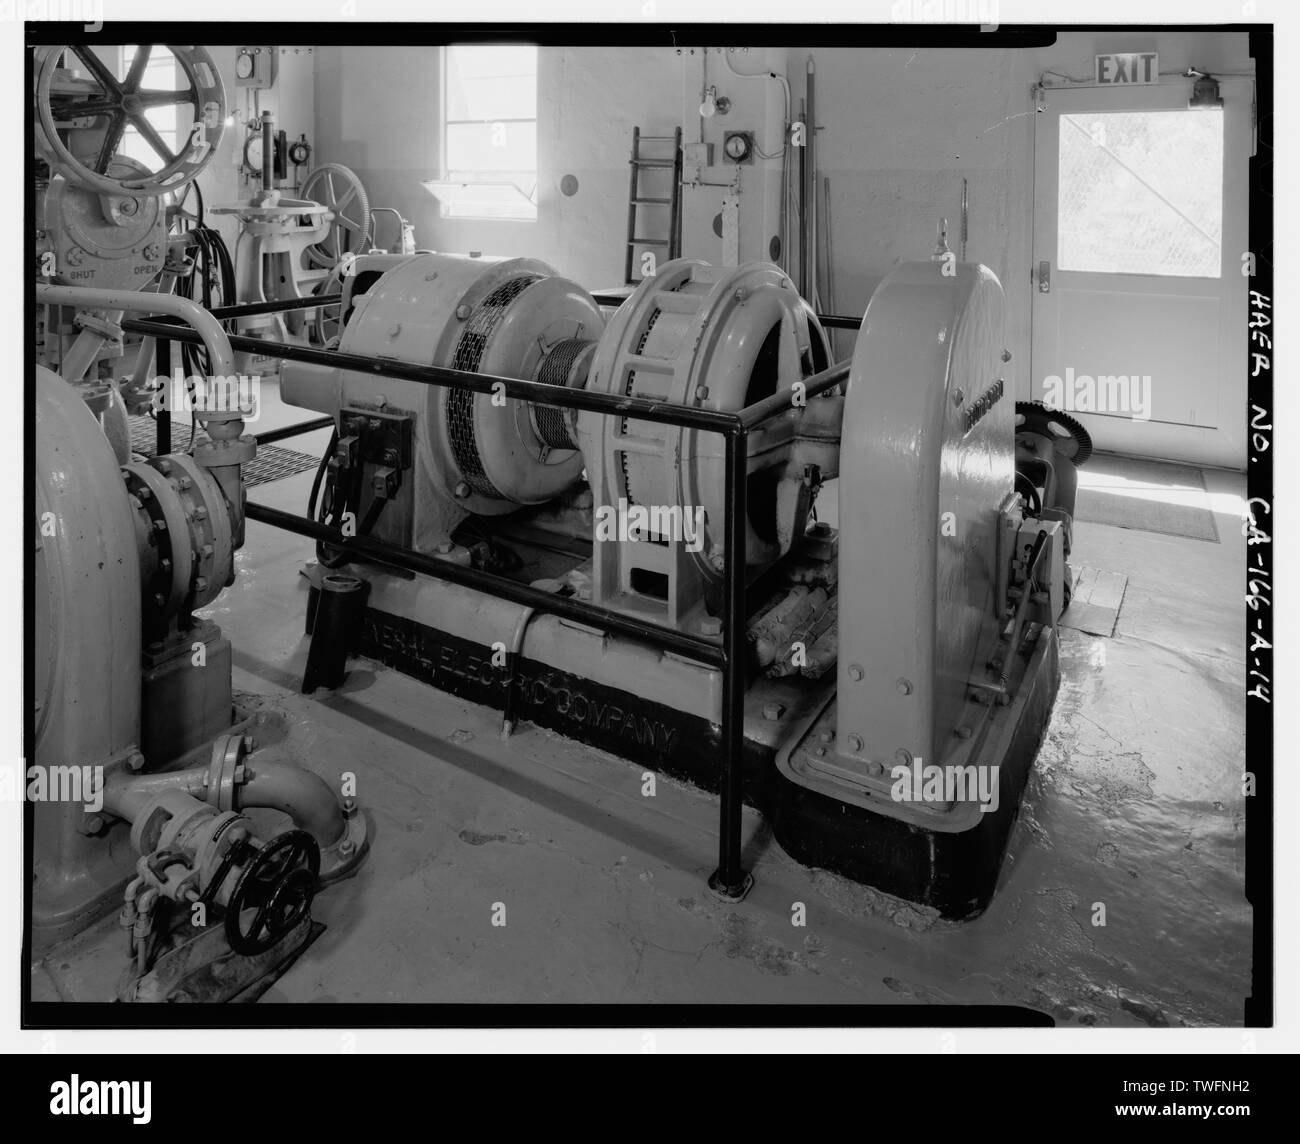 POWERHOUSE INTERIOR, EXCITER No. 2 SHOWING GENERAL ELECTRIC INDUCTION MOTOR IN SERIES BETWEEN PELTON-DOBLE IMPULSE WHEEL AND GENERAL ELECTRIC GENERATOR. VIEW TO EAST. - Rush Creek Hydroelectric System, Powerhouse Exciters, Rush Creek, June Lake, Mono County, CA Stock Photo